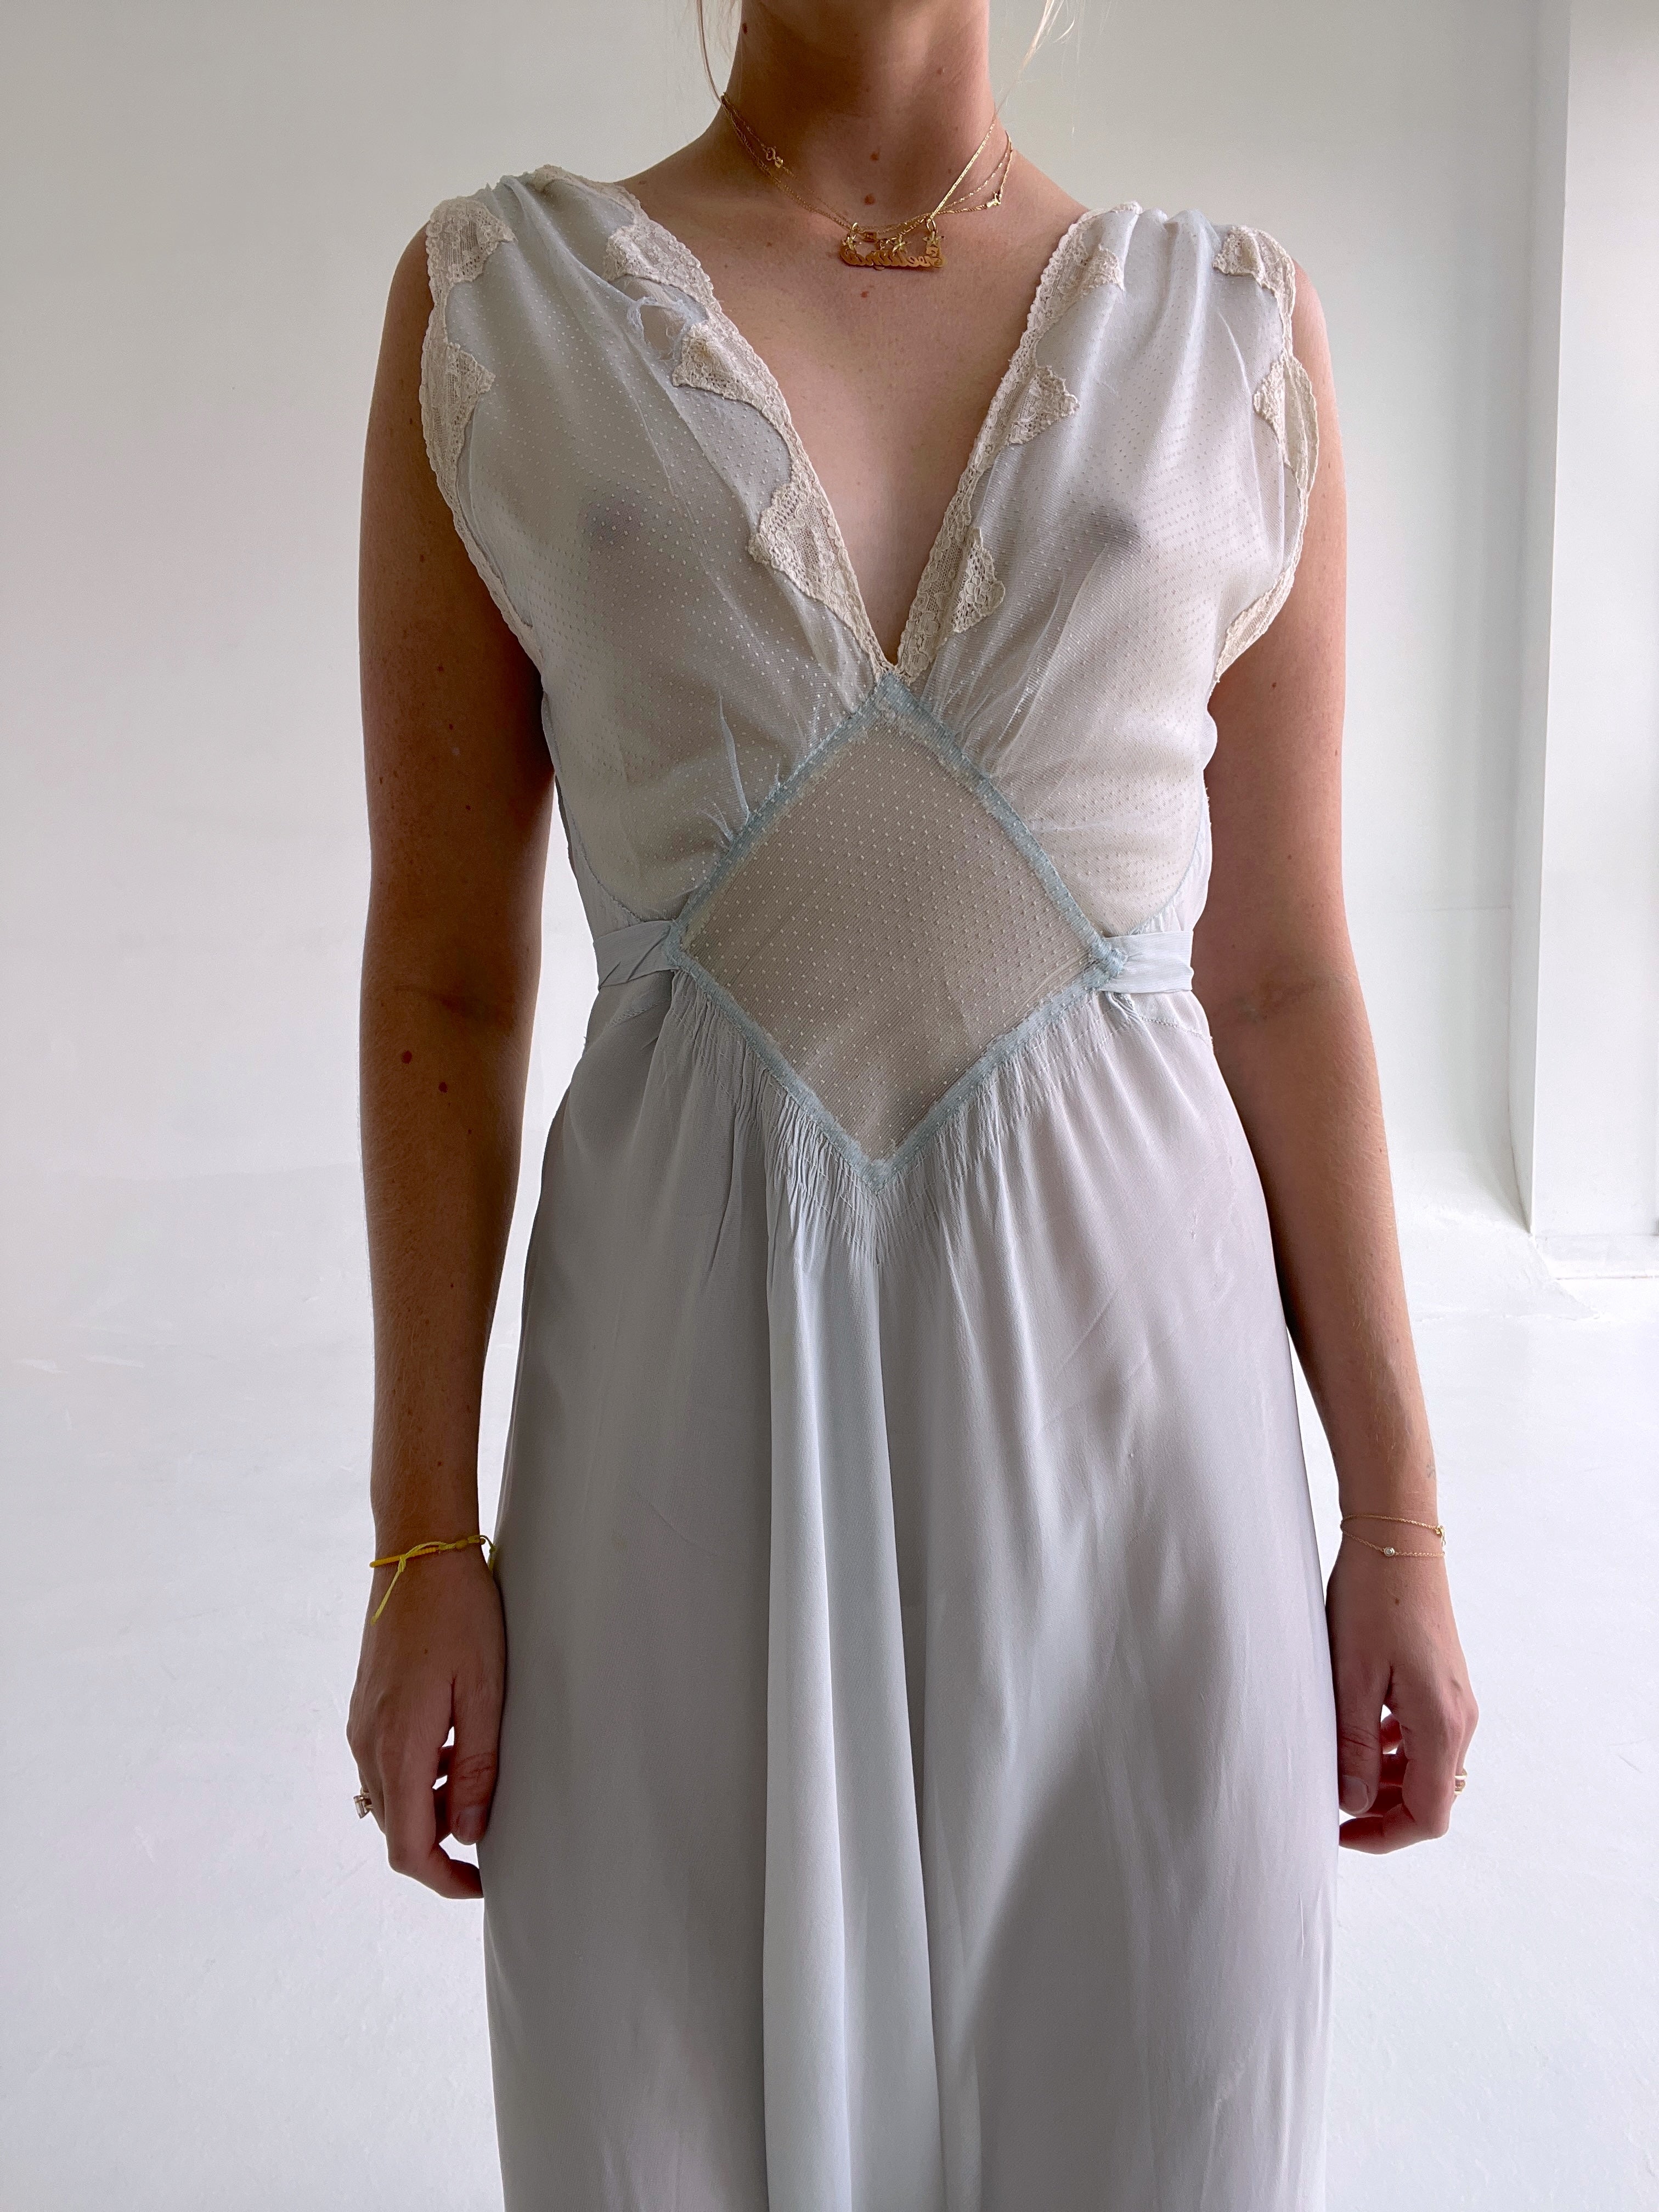 1940's Pale Blue Slip Dress with Cream Lace